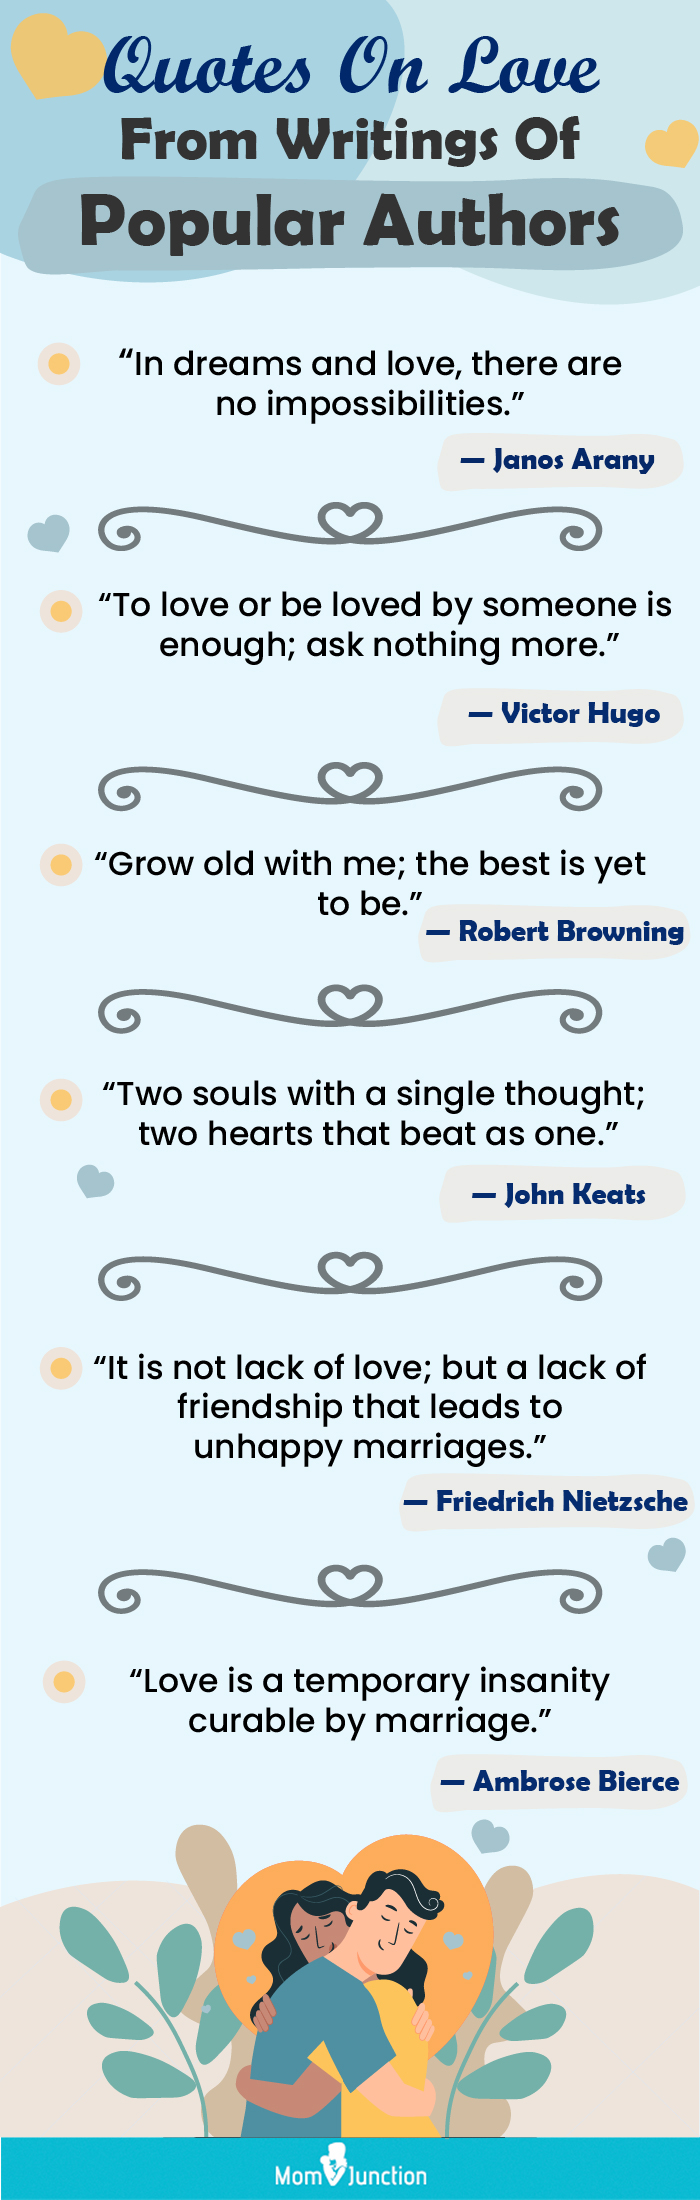 quotes on love from writings of popular authors (infographic)